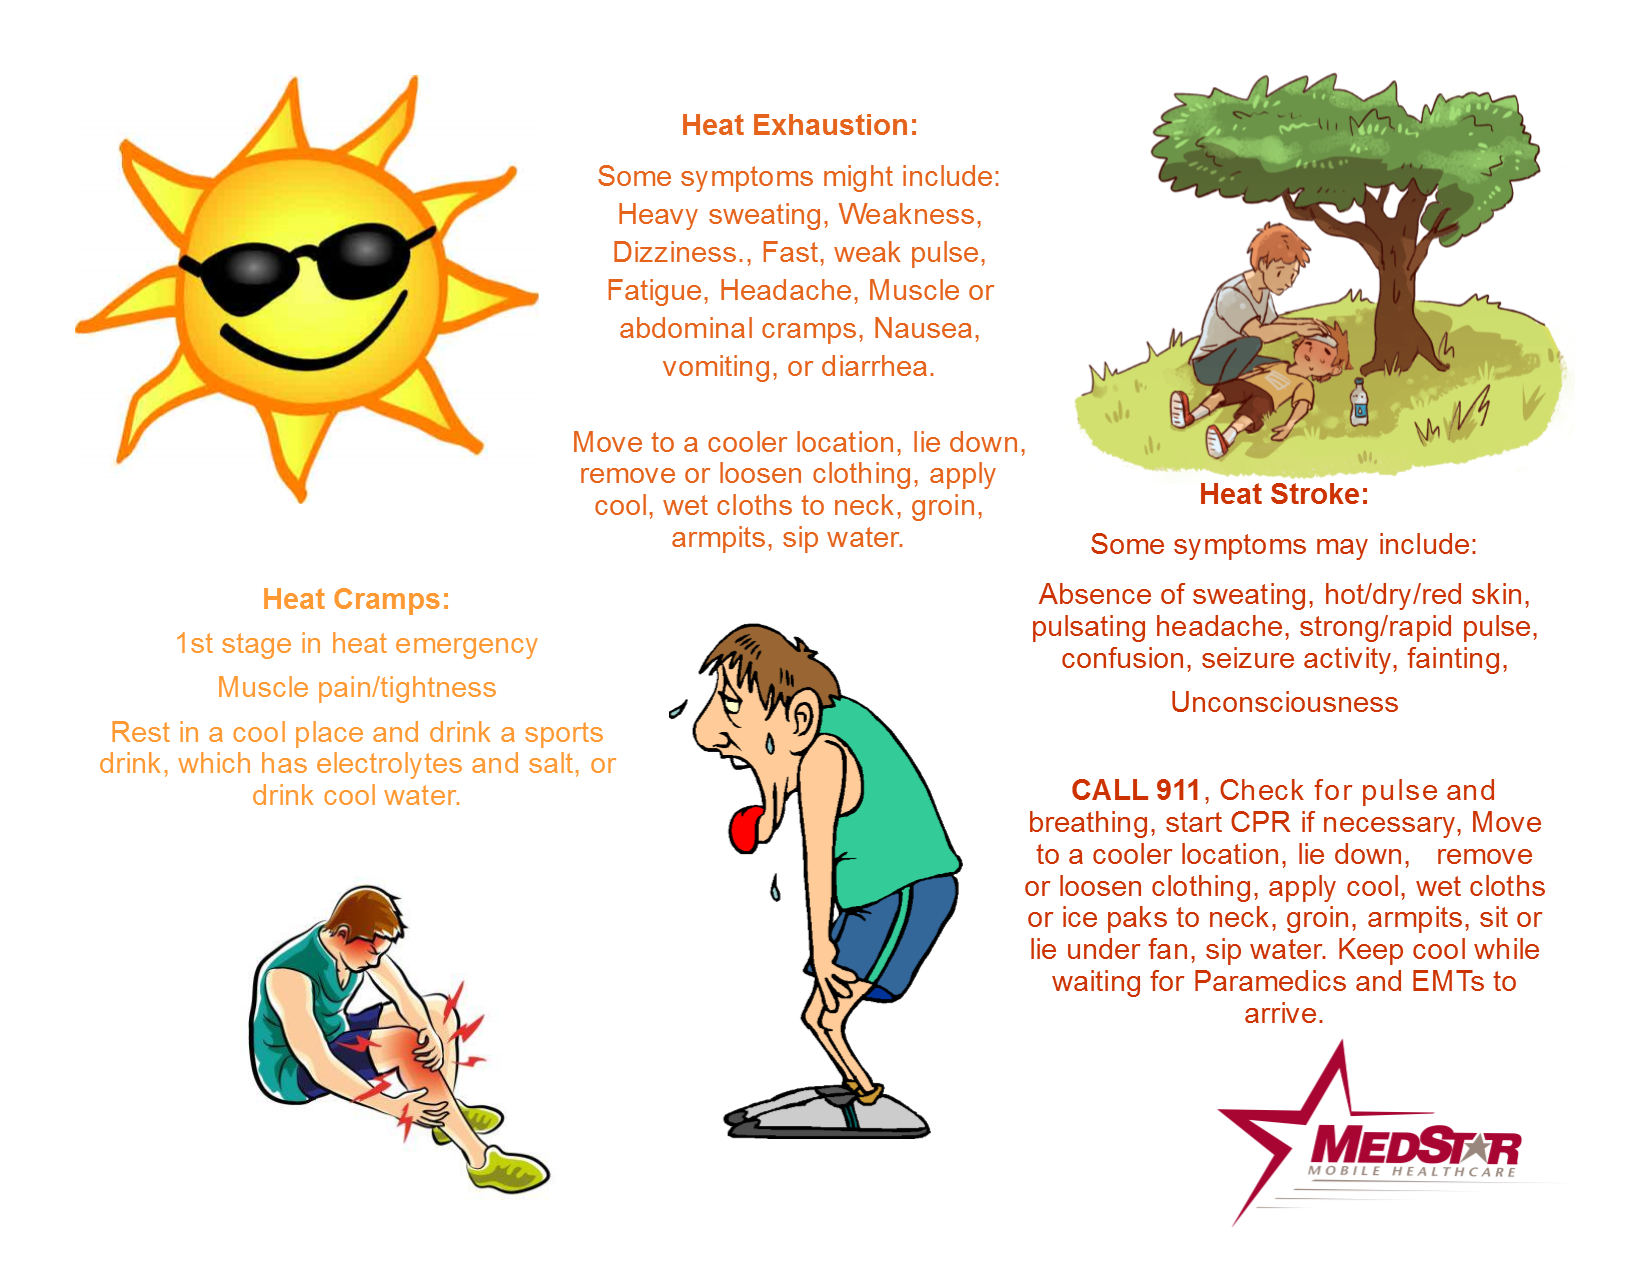 Media Outlets and MedStar Partner on Tips to Beat the Heat